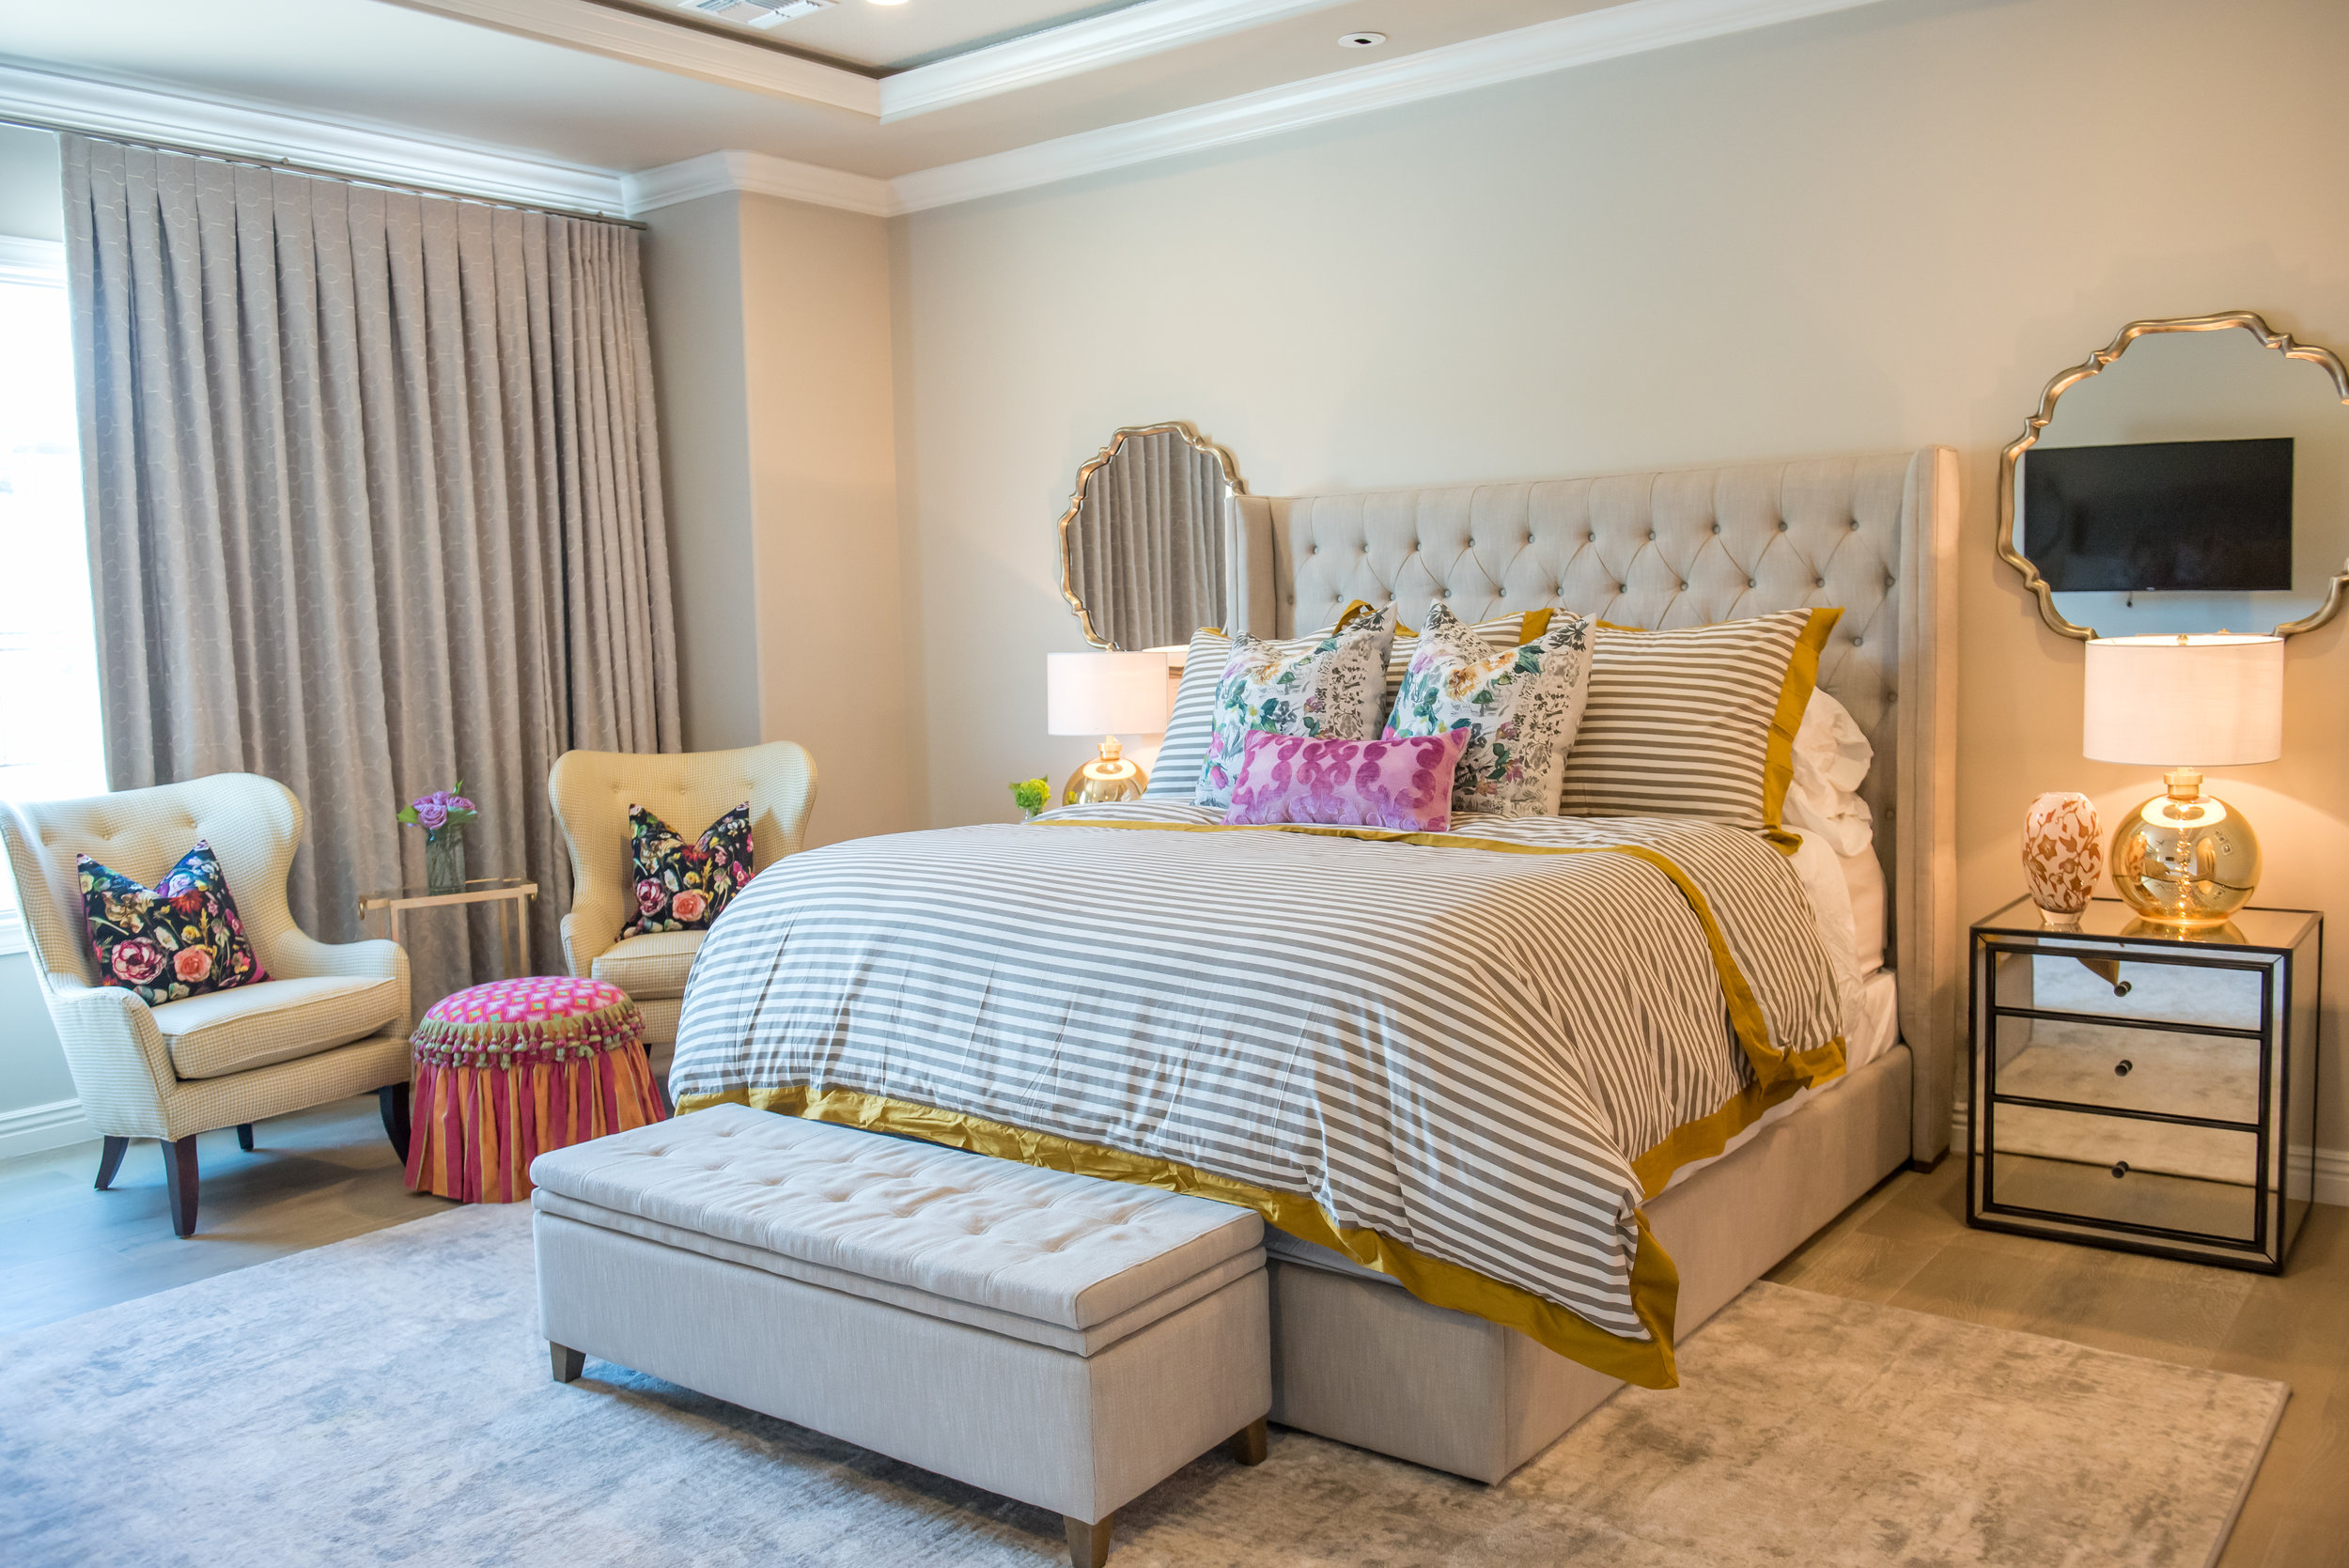 28 Masterbed+Scottsdale+transitional+floral+yellow+pink.jpg